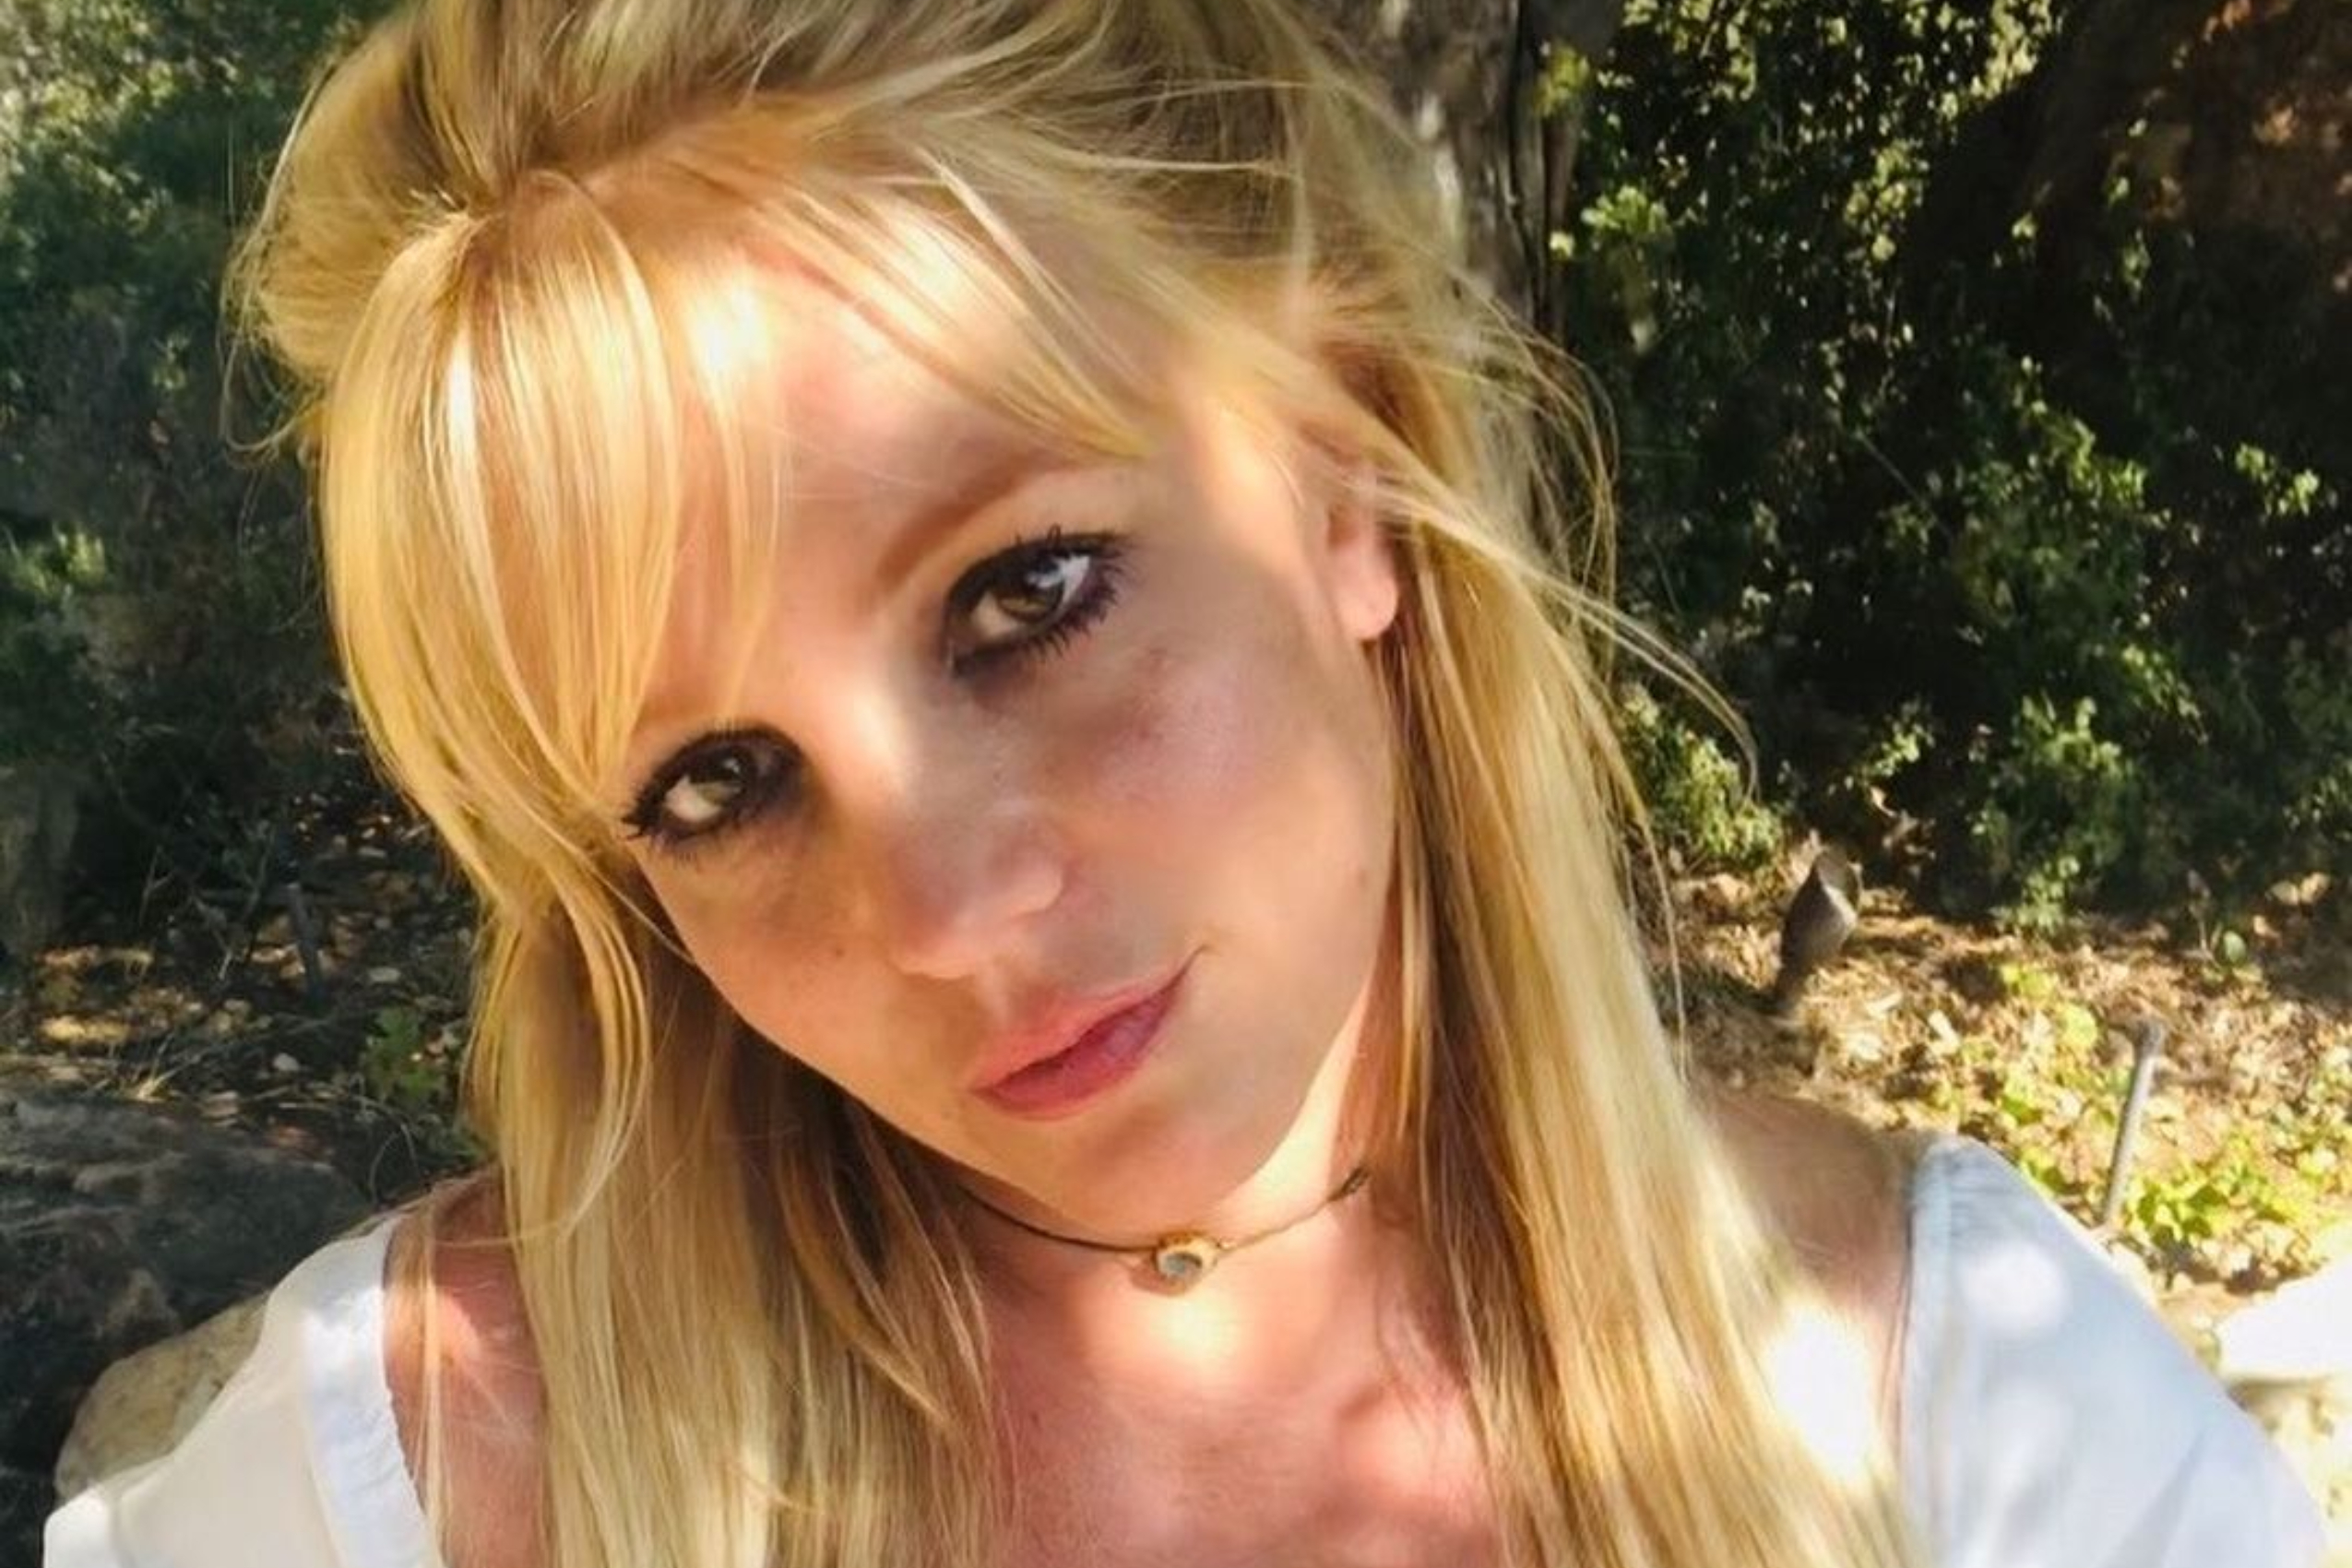 10 Moments From The Framing Britney Spears Doco That Made Me Want To Punch My Screen